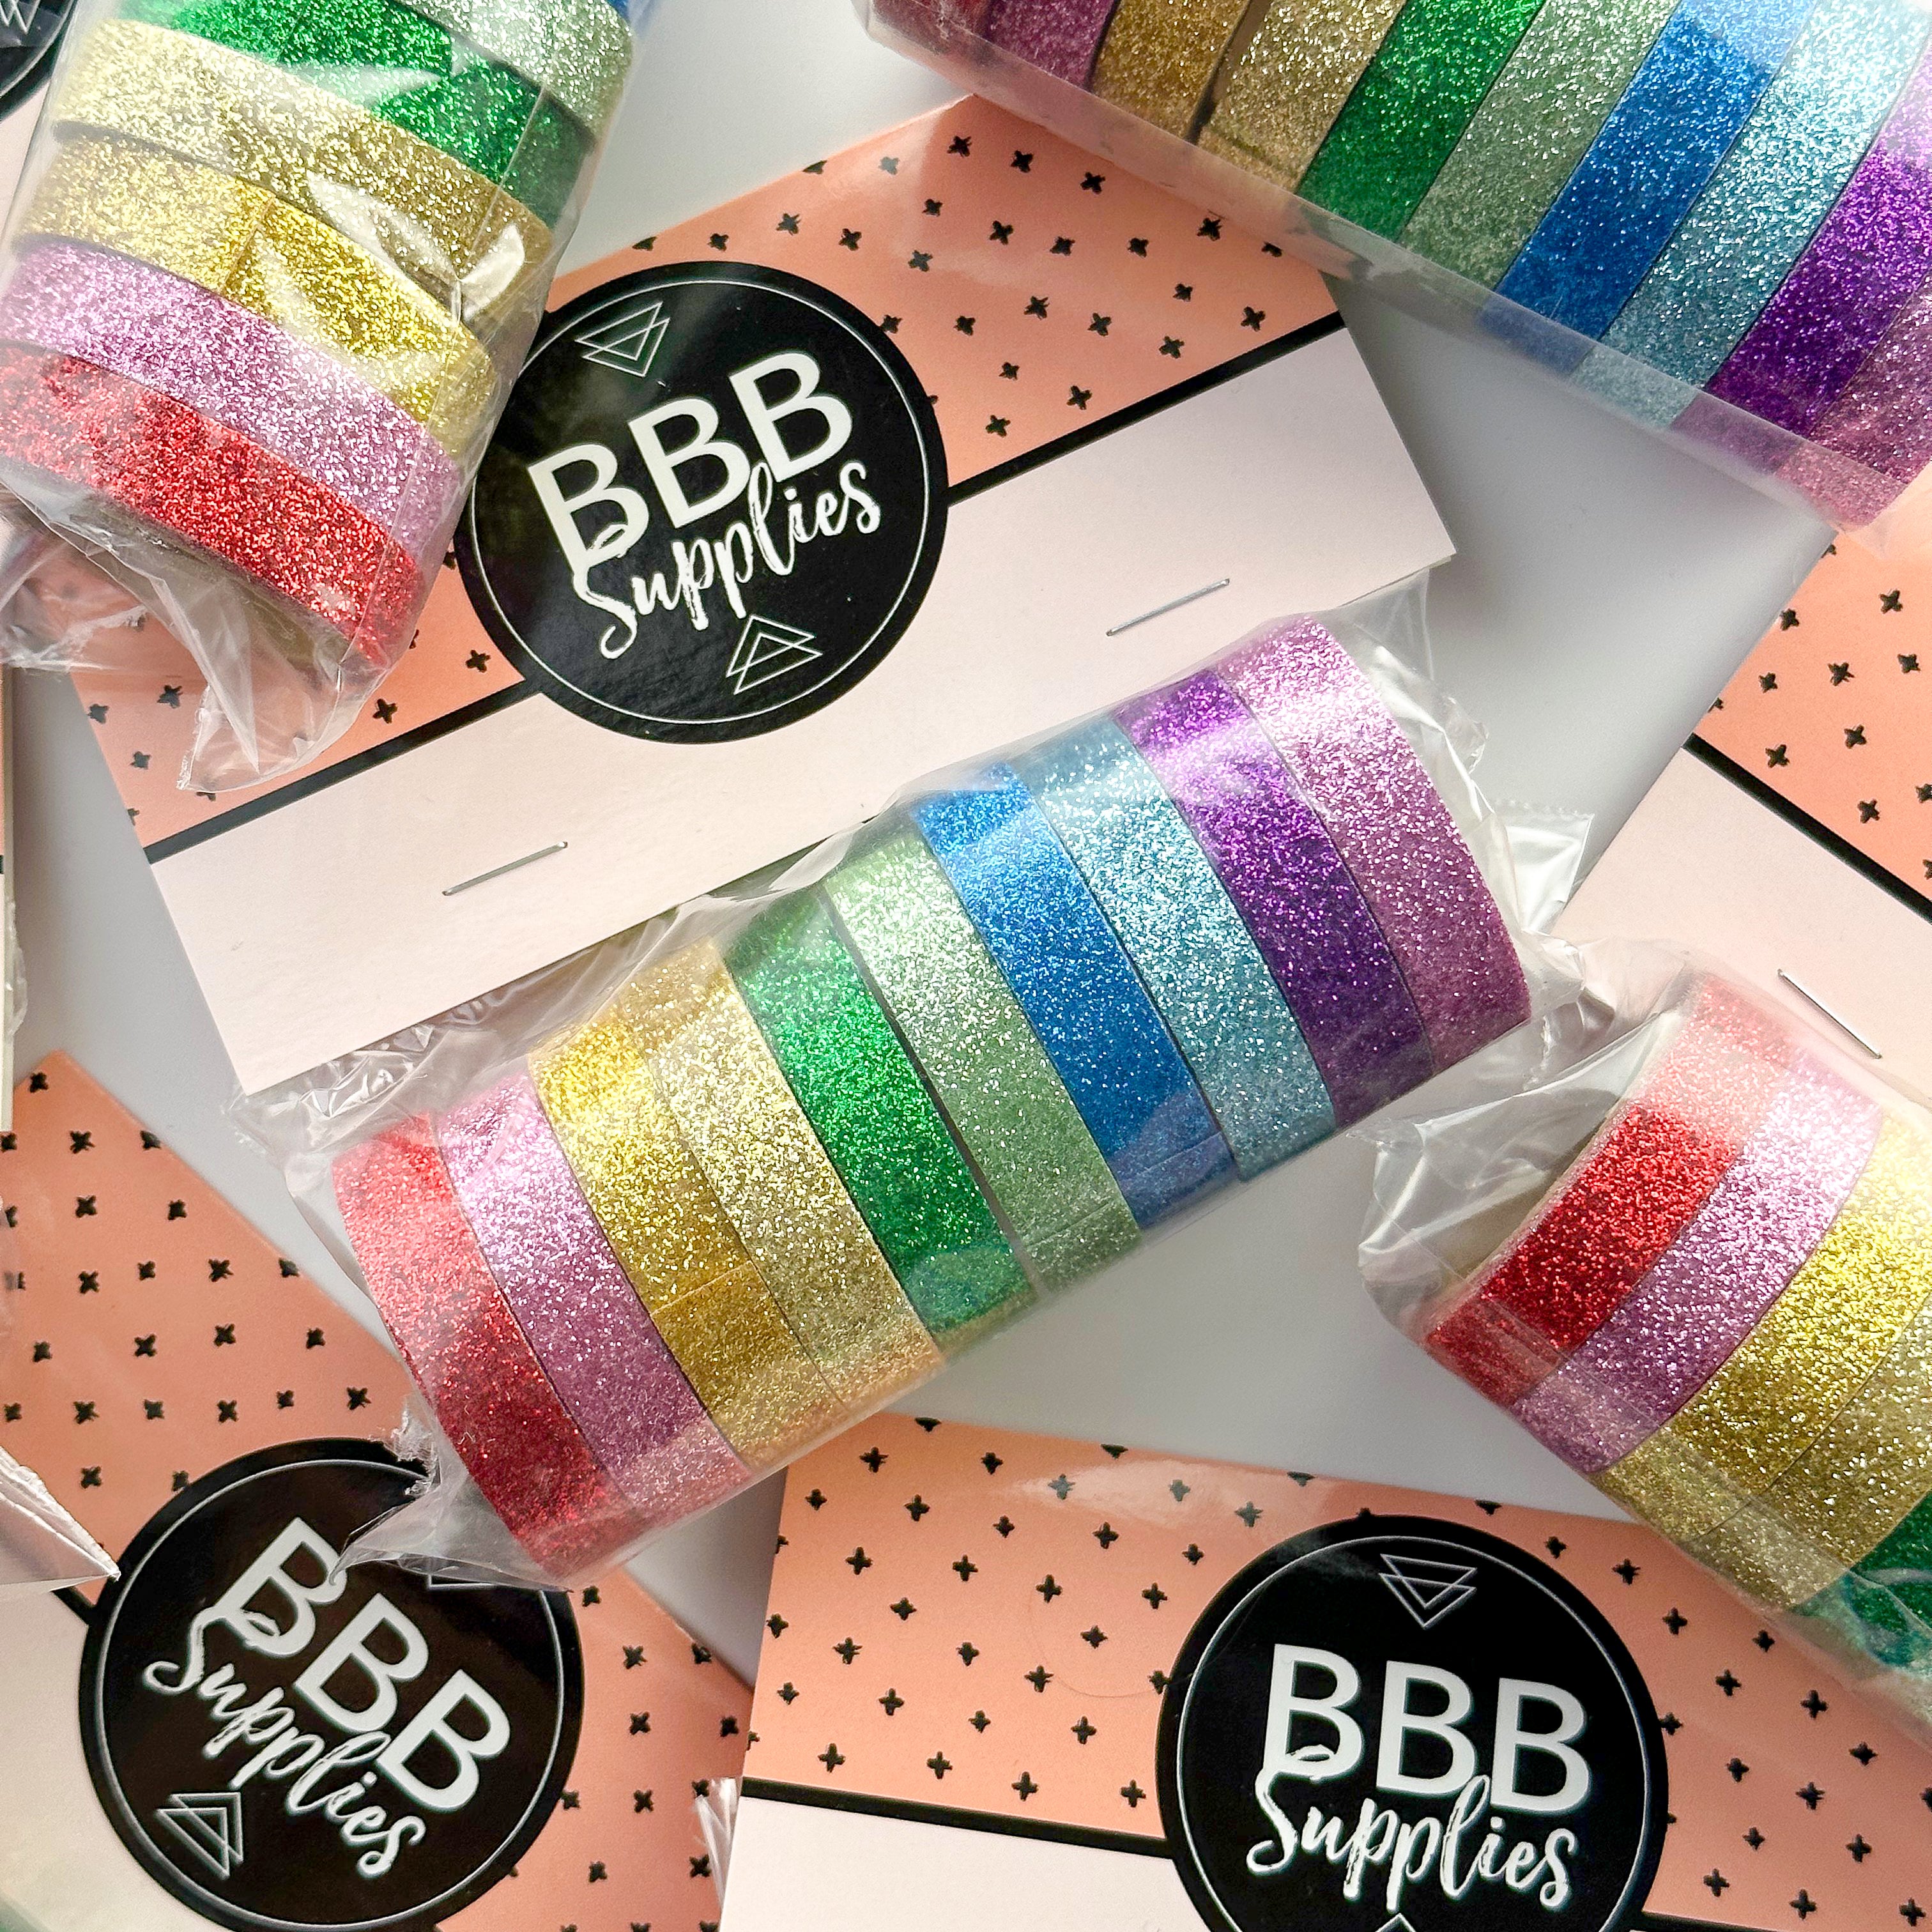 This set of washi tape is perfect for multiple projects. The set includes pastel and primary red, blue, yellow, green, blue, and purple glitter tapes. This tape will add some sparkle to any project. This set is sold at BBB Supplies Craft Shop.